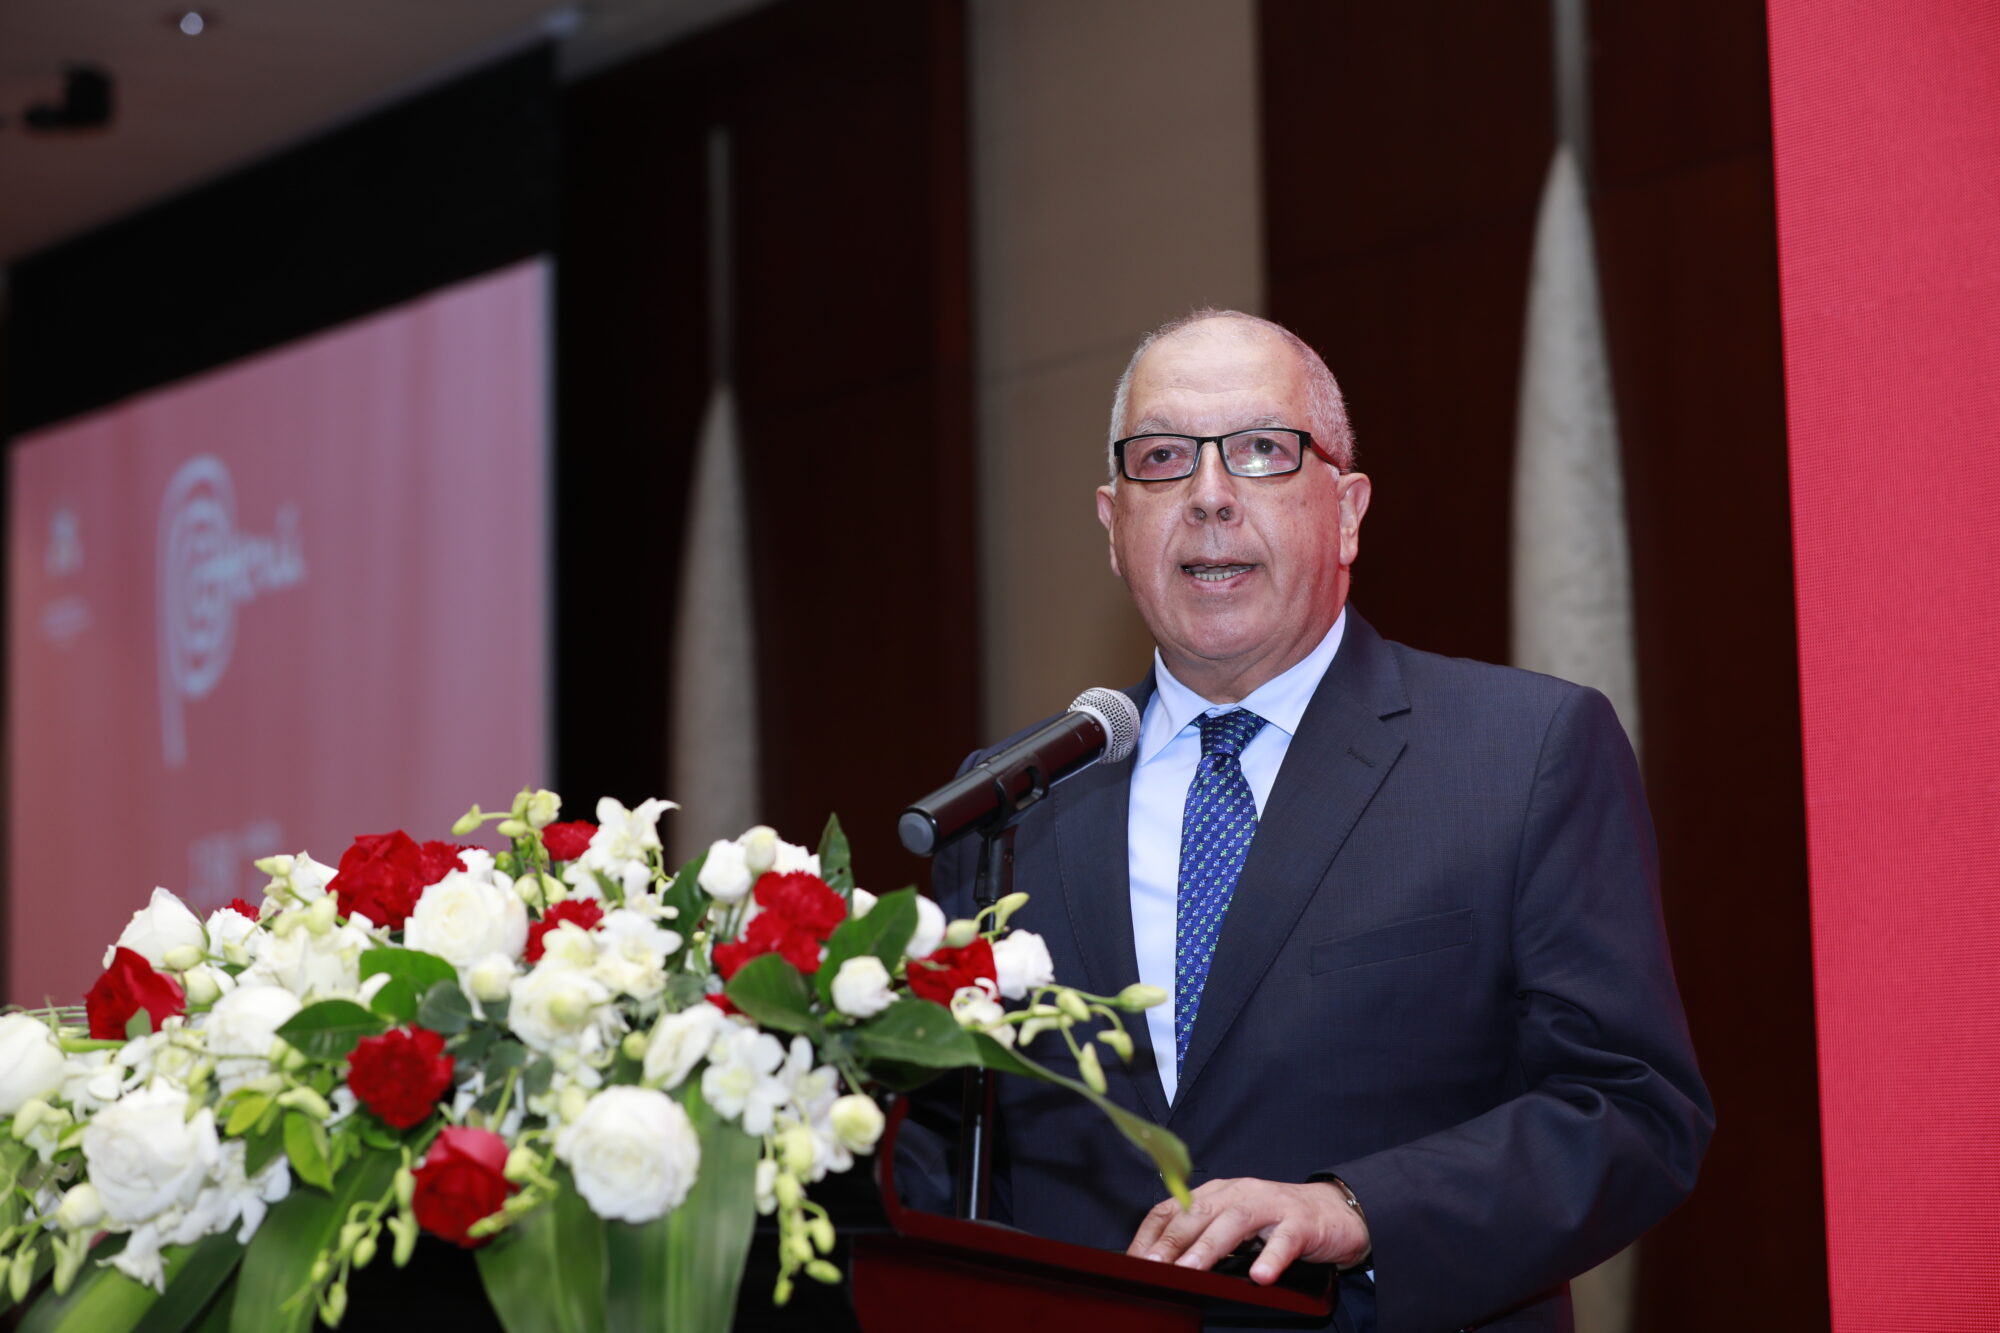 luis quesada, Peru's ambassador to China, speaking in front of a microphone.